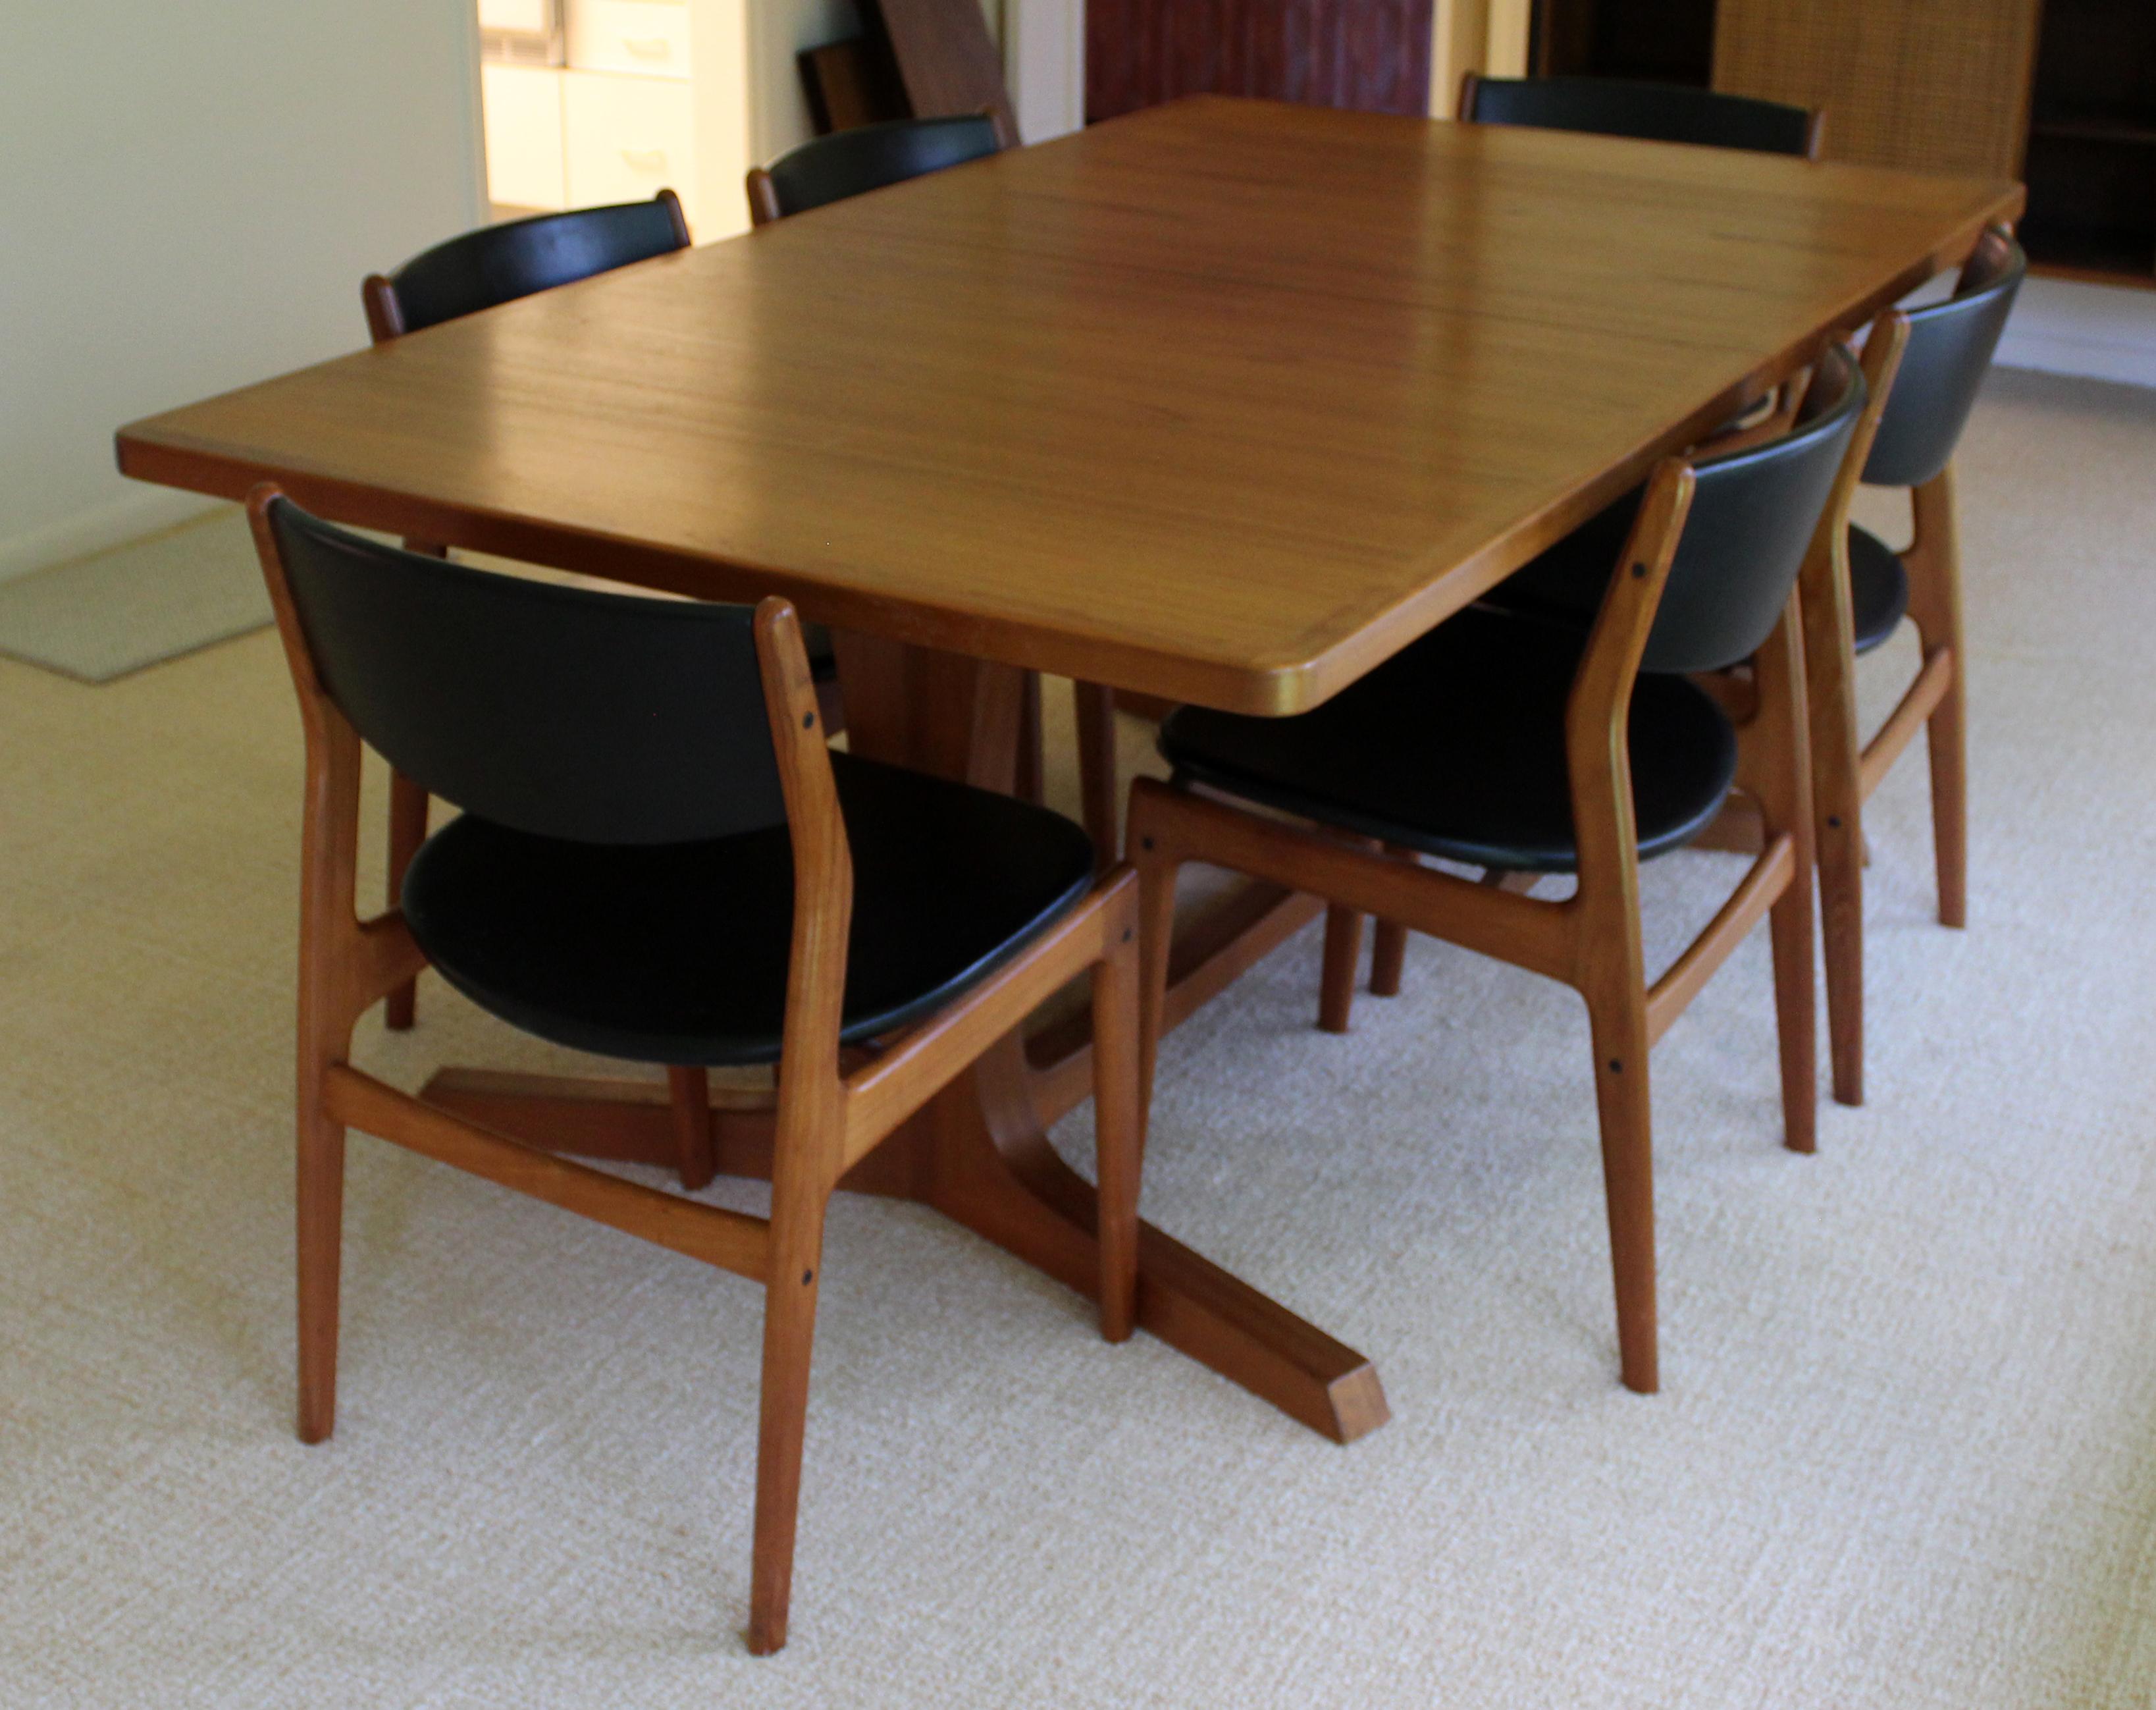 For your consideration is a gorgeous, expandable dining table, with two leaves, and six matching chairs, with black leather upholstery, circa 1960s. In excellent vintage condition. The dimensions of the table are 72.5